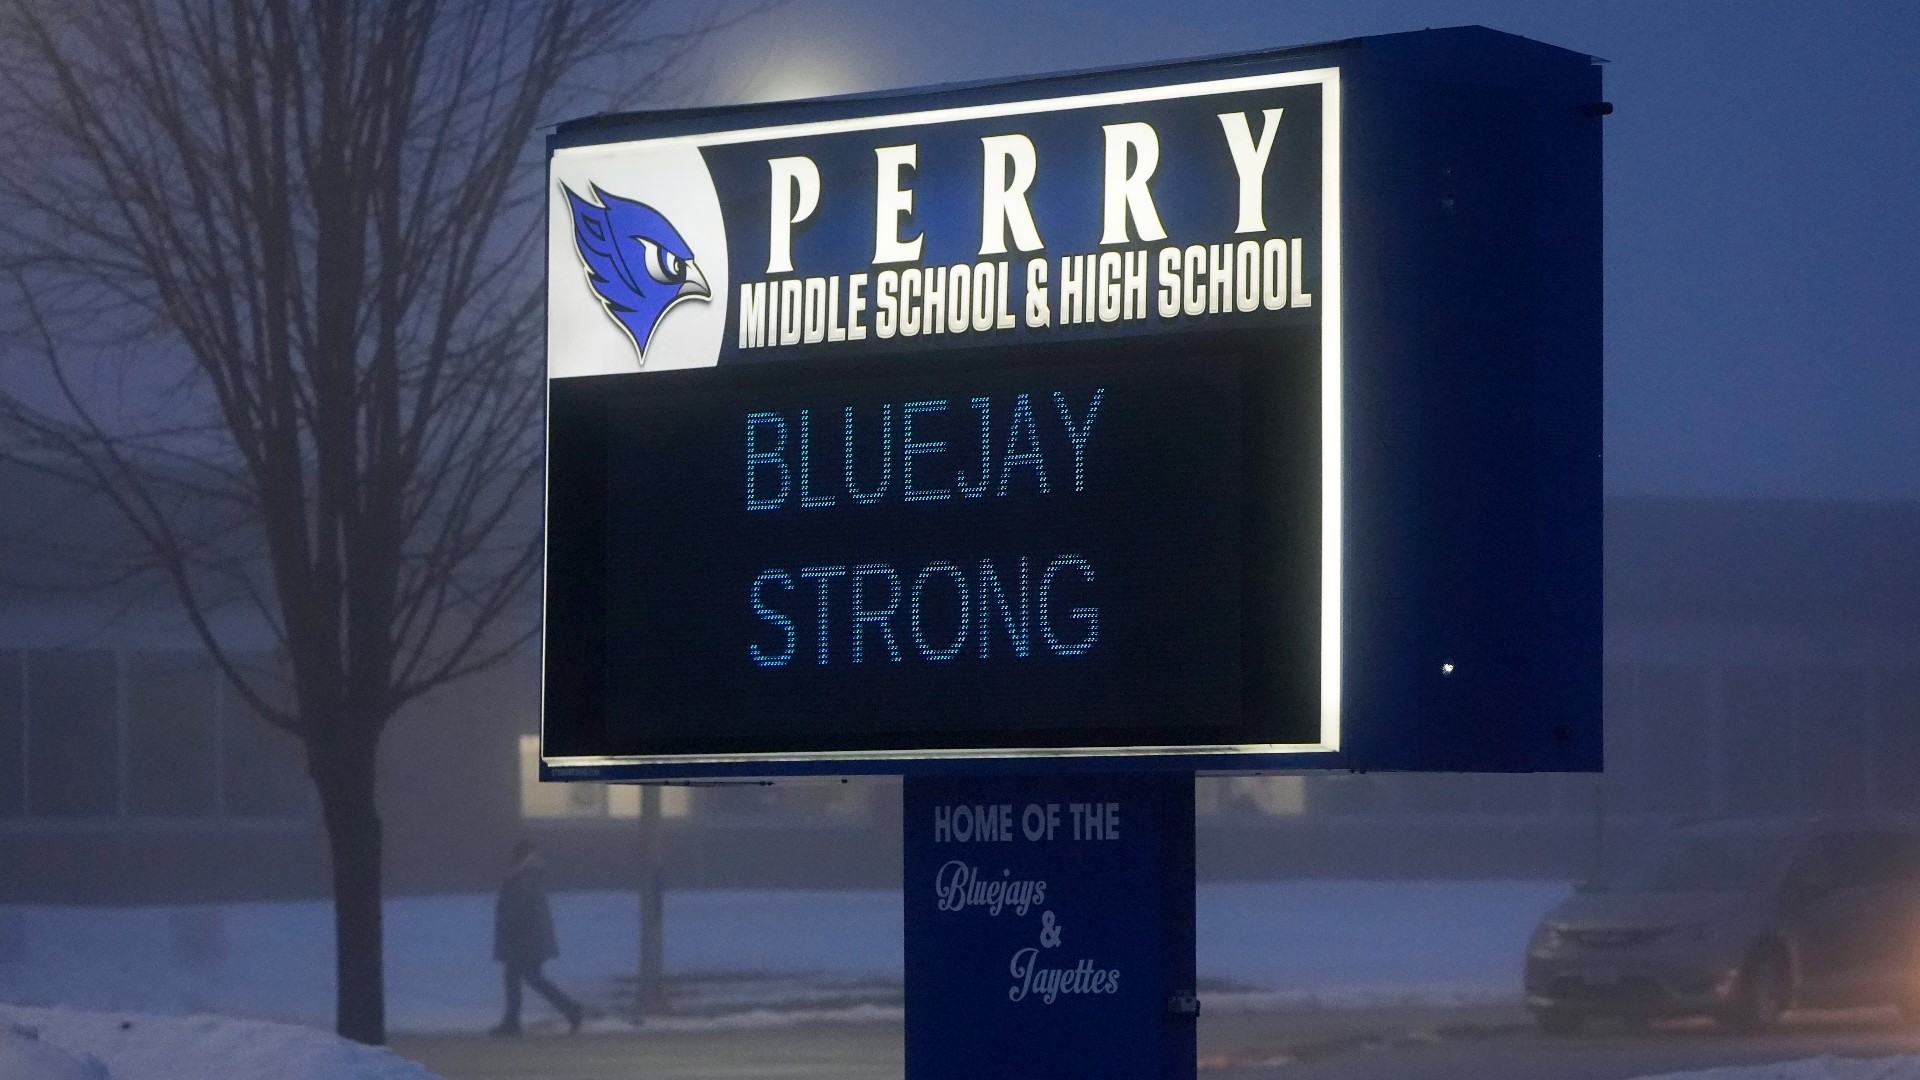 A parent told Local 5 she still has questions about funds raised by the community for the school shooting victims' families.